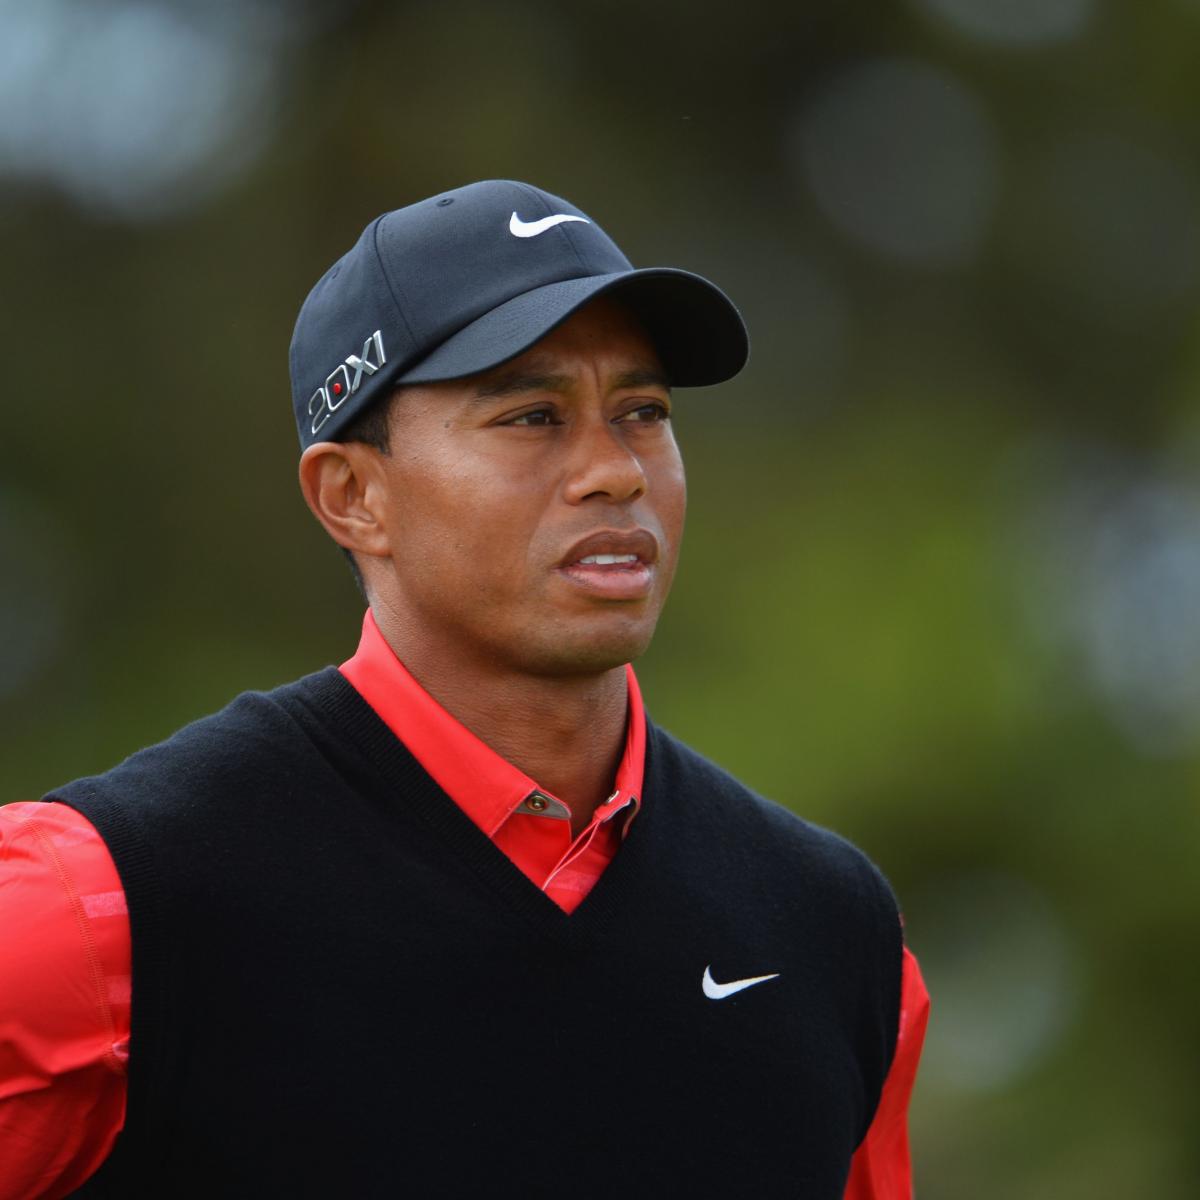 Open Championship 2013: Tiger Woods' Recent Major Woes Will Taint Star ...